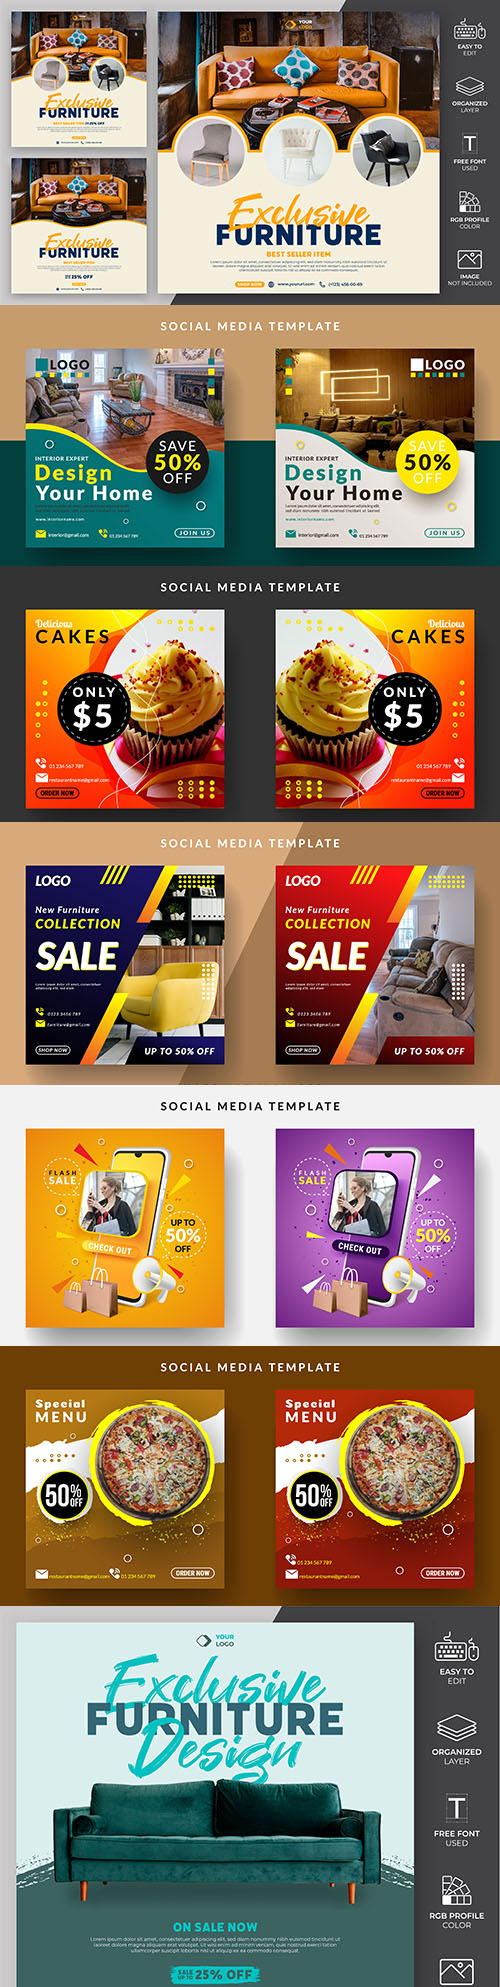 Social media message template to promote sale of item 8